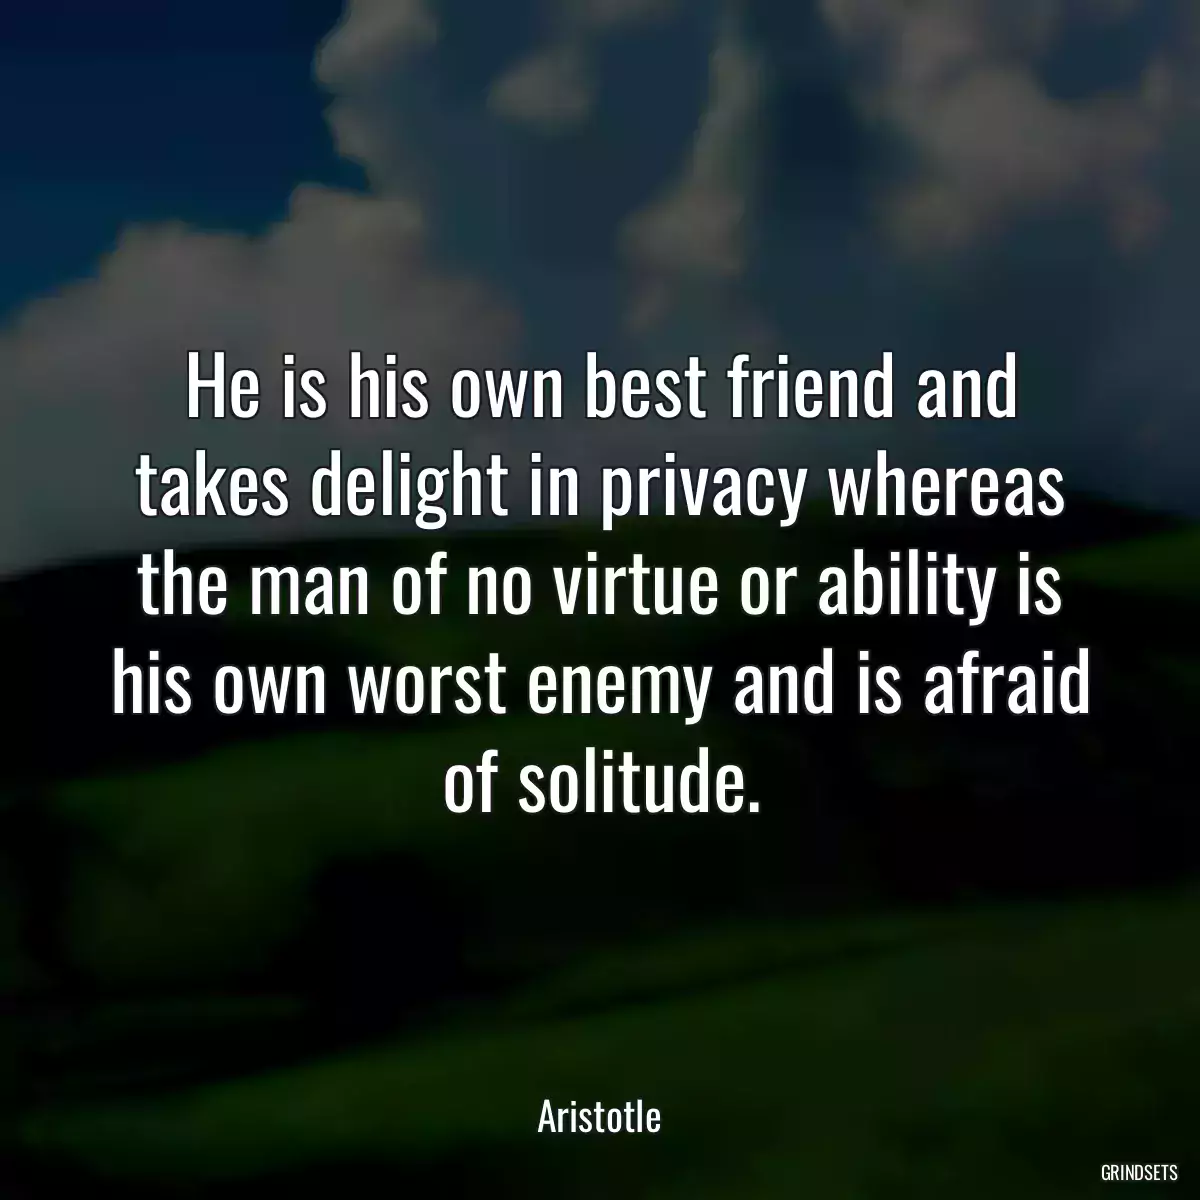 He is his own best friend and takes delight in privacy whereas the man of no virtue or ability is his own worst enemy and is afraid of solitude.